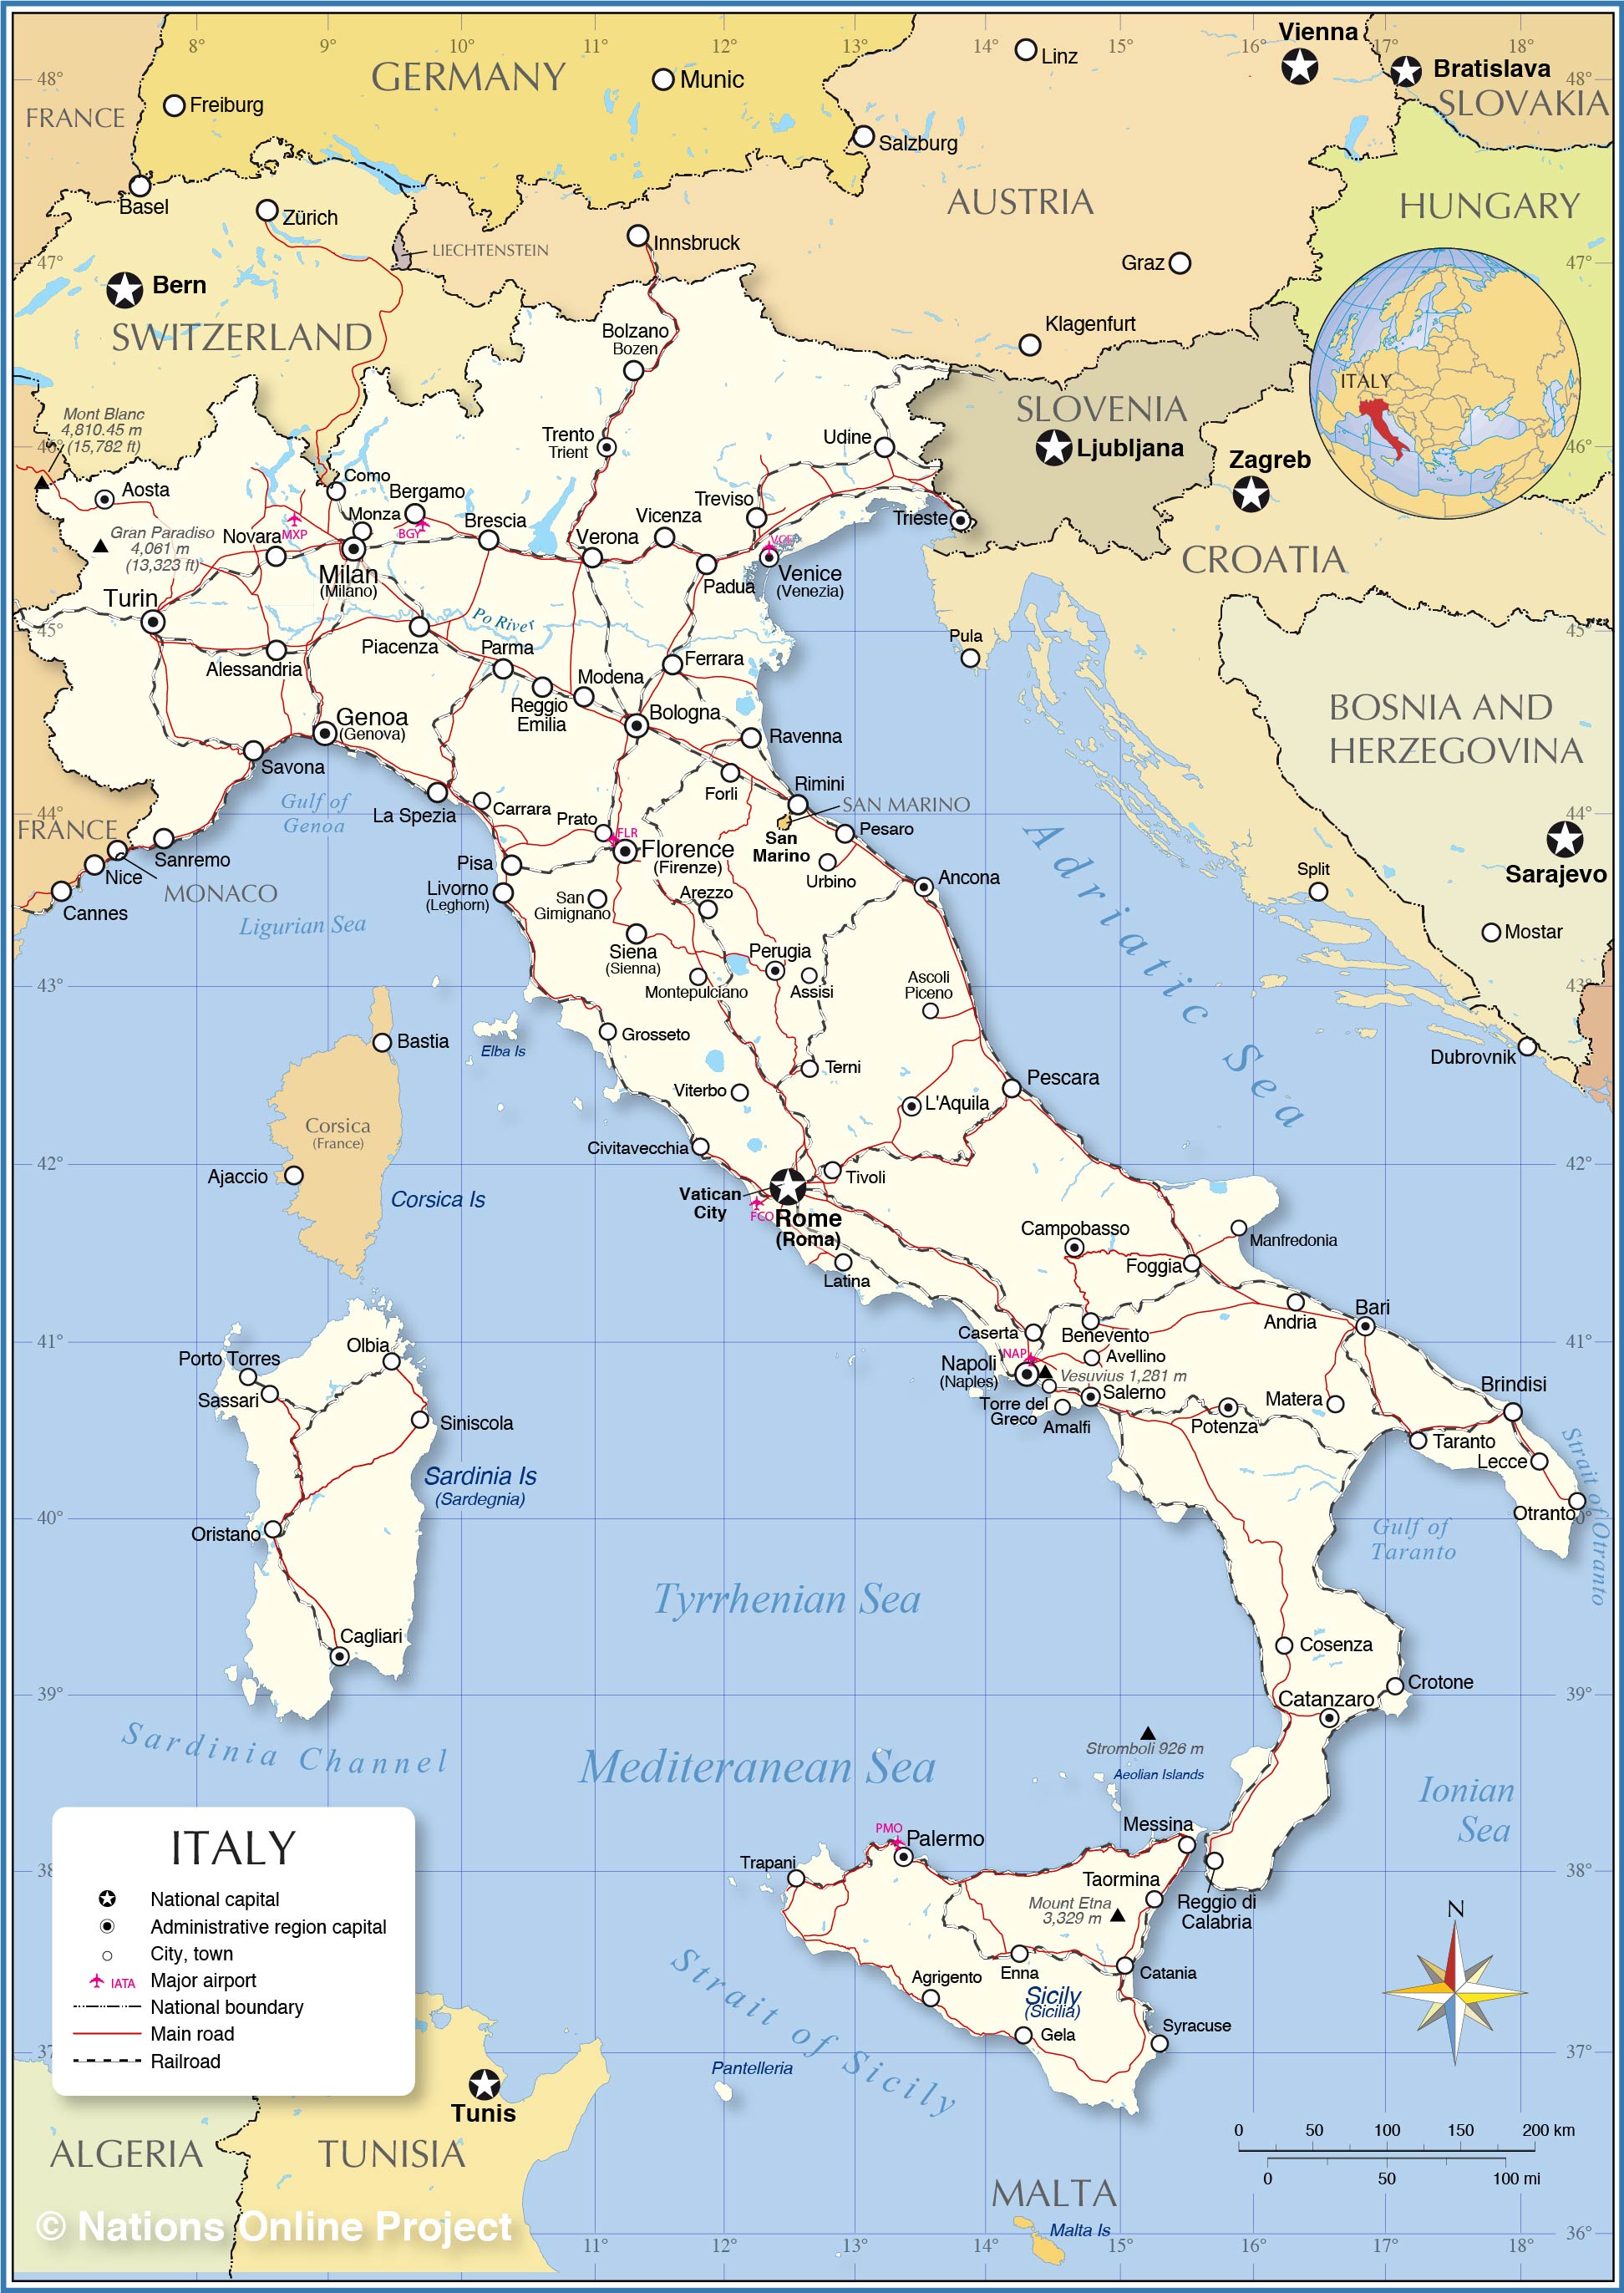 map of italy and spain with cities Political Map Of Italy Nations Online Project map of italy and spain with cities